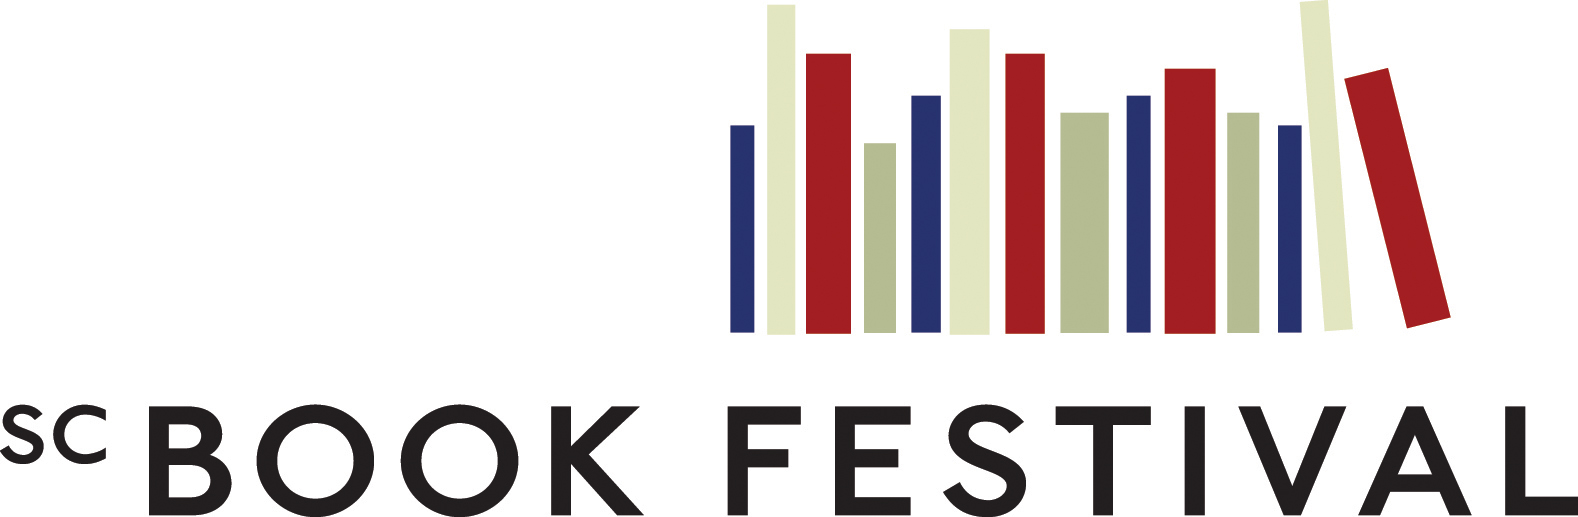 Book-related exhibitors invited to apply for the South Carolina Book Festival